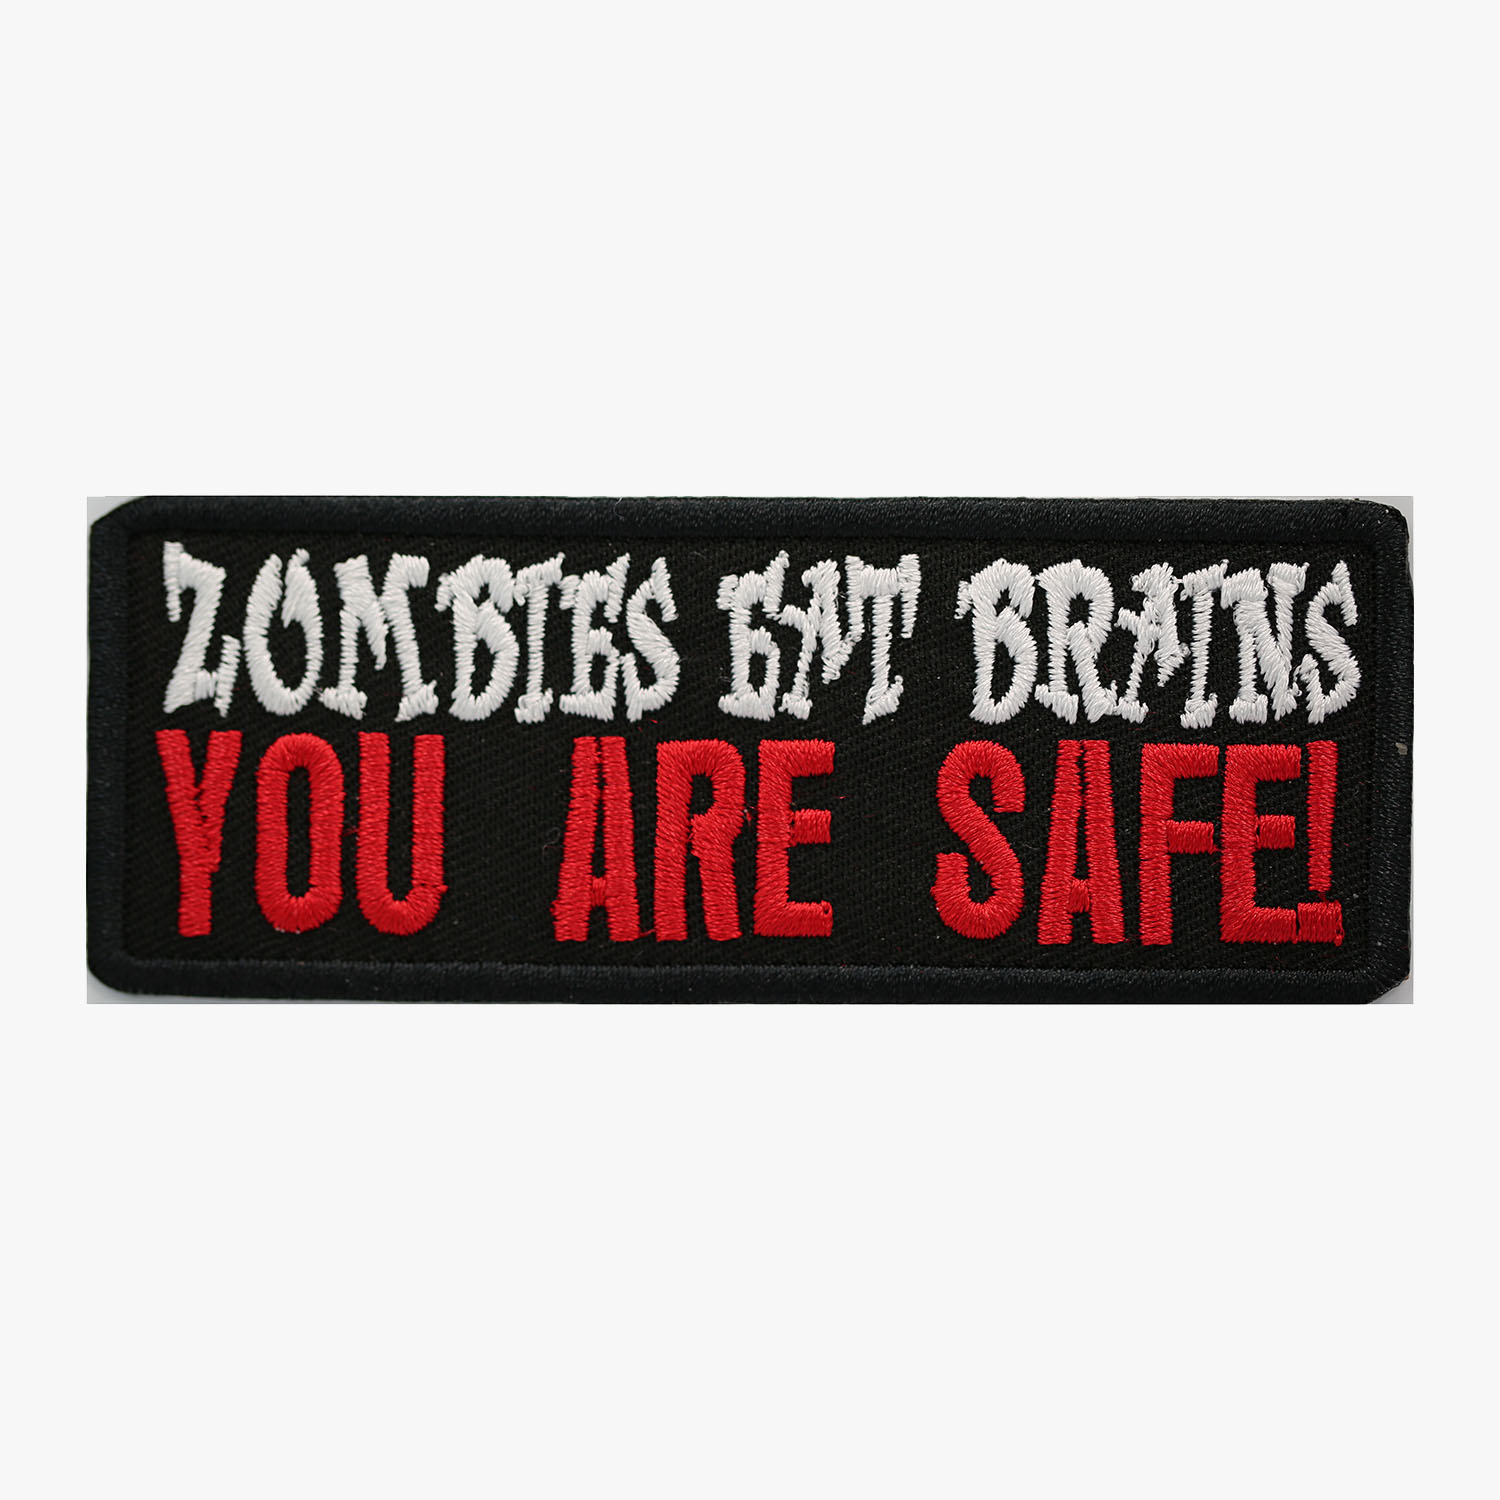 ZOMBIES EAT BRAINS Embroidered Biker Cut Patch